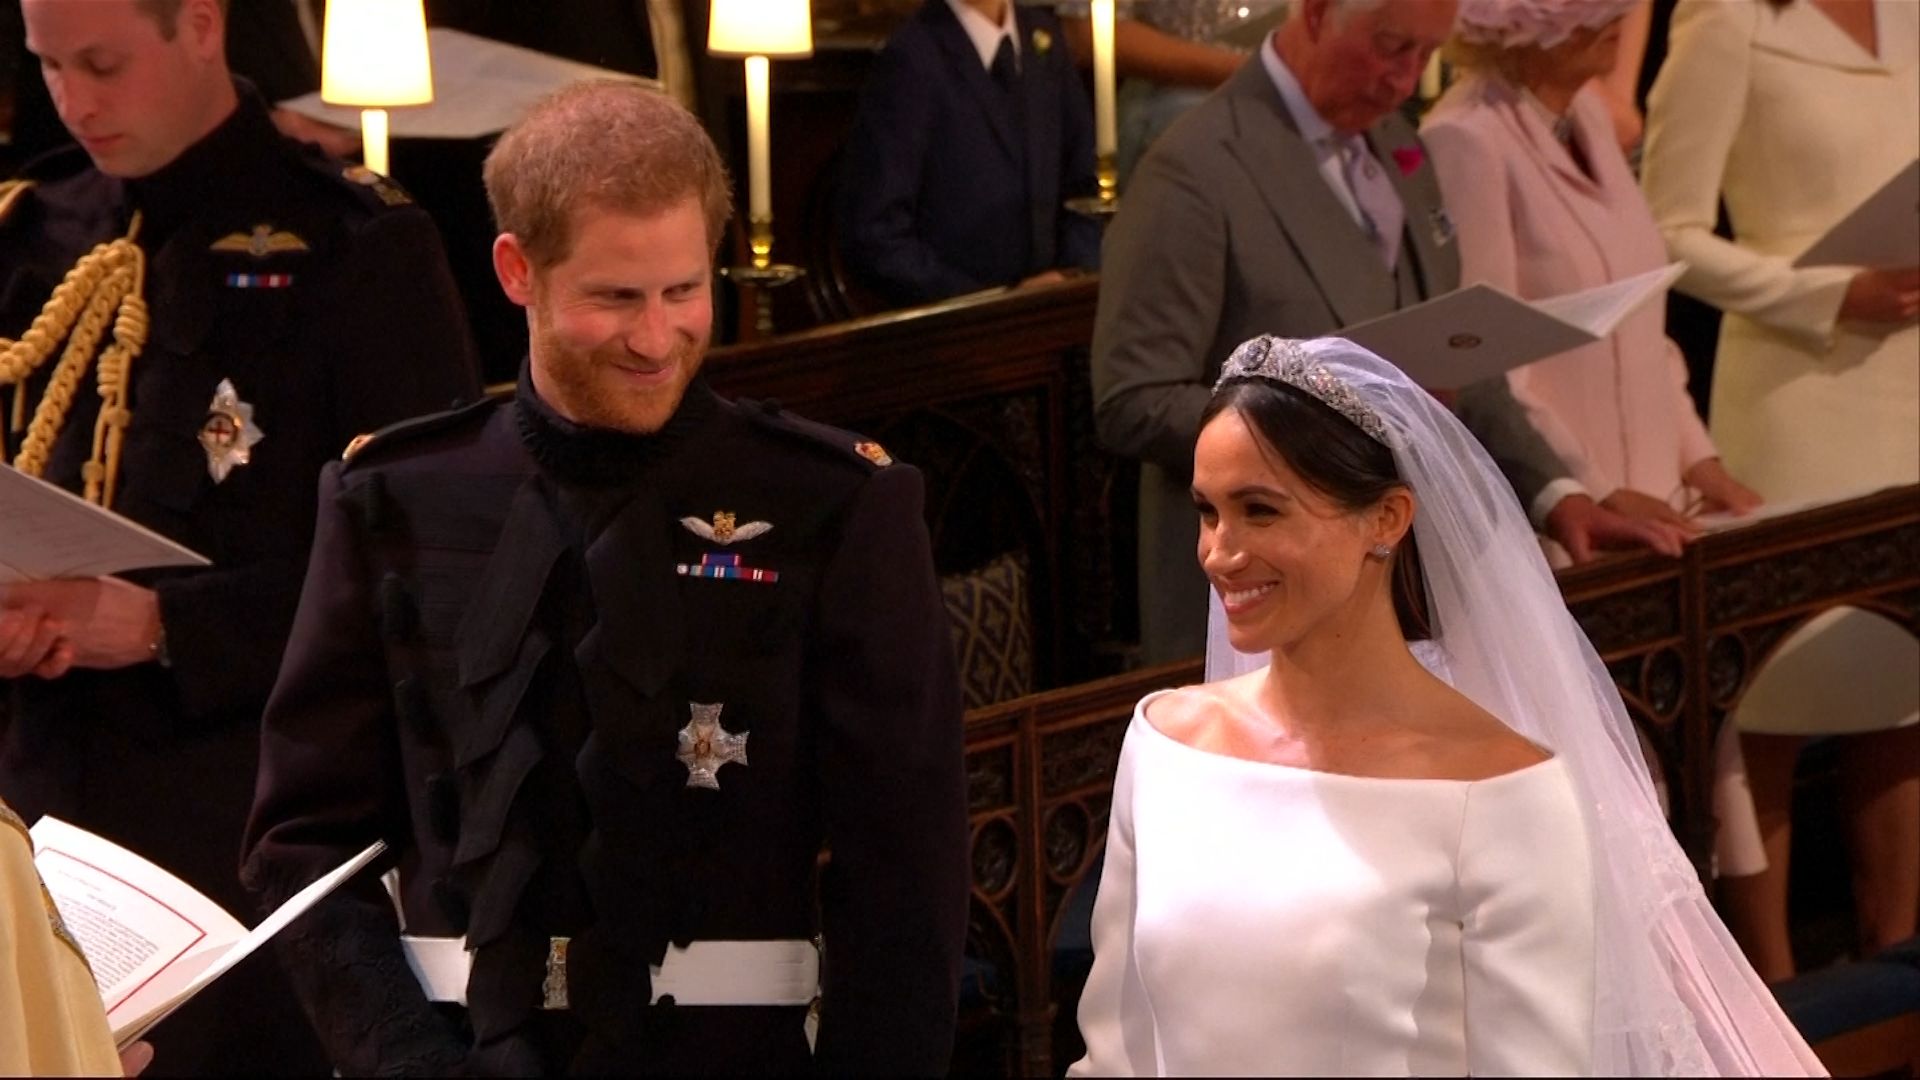 Watch Meghan Markle and Prince Harry Exchange Their Vows | Glamour